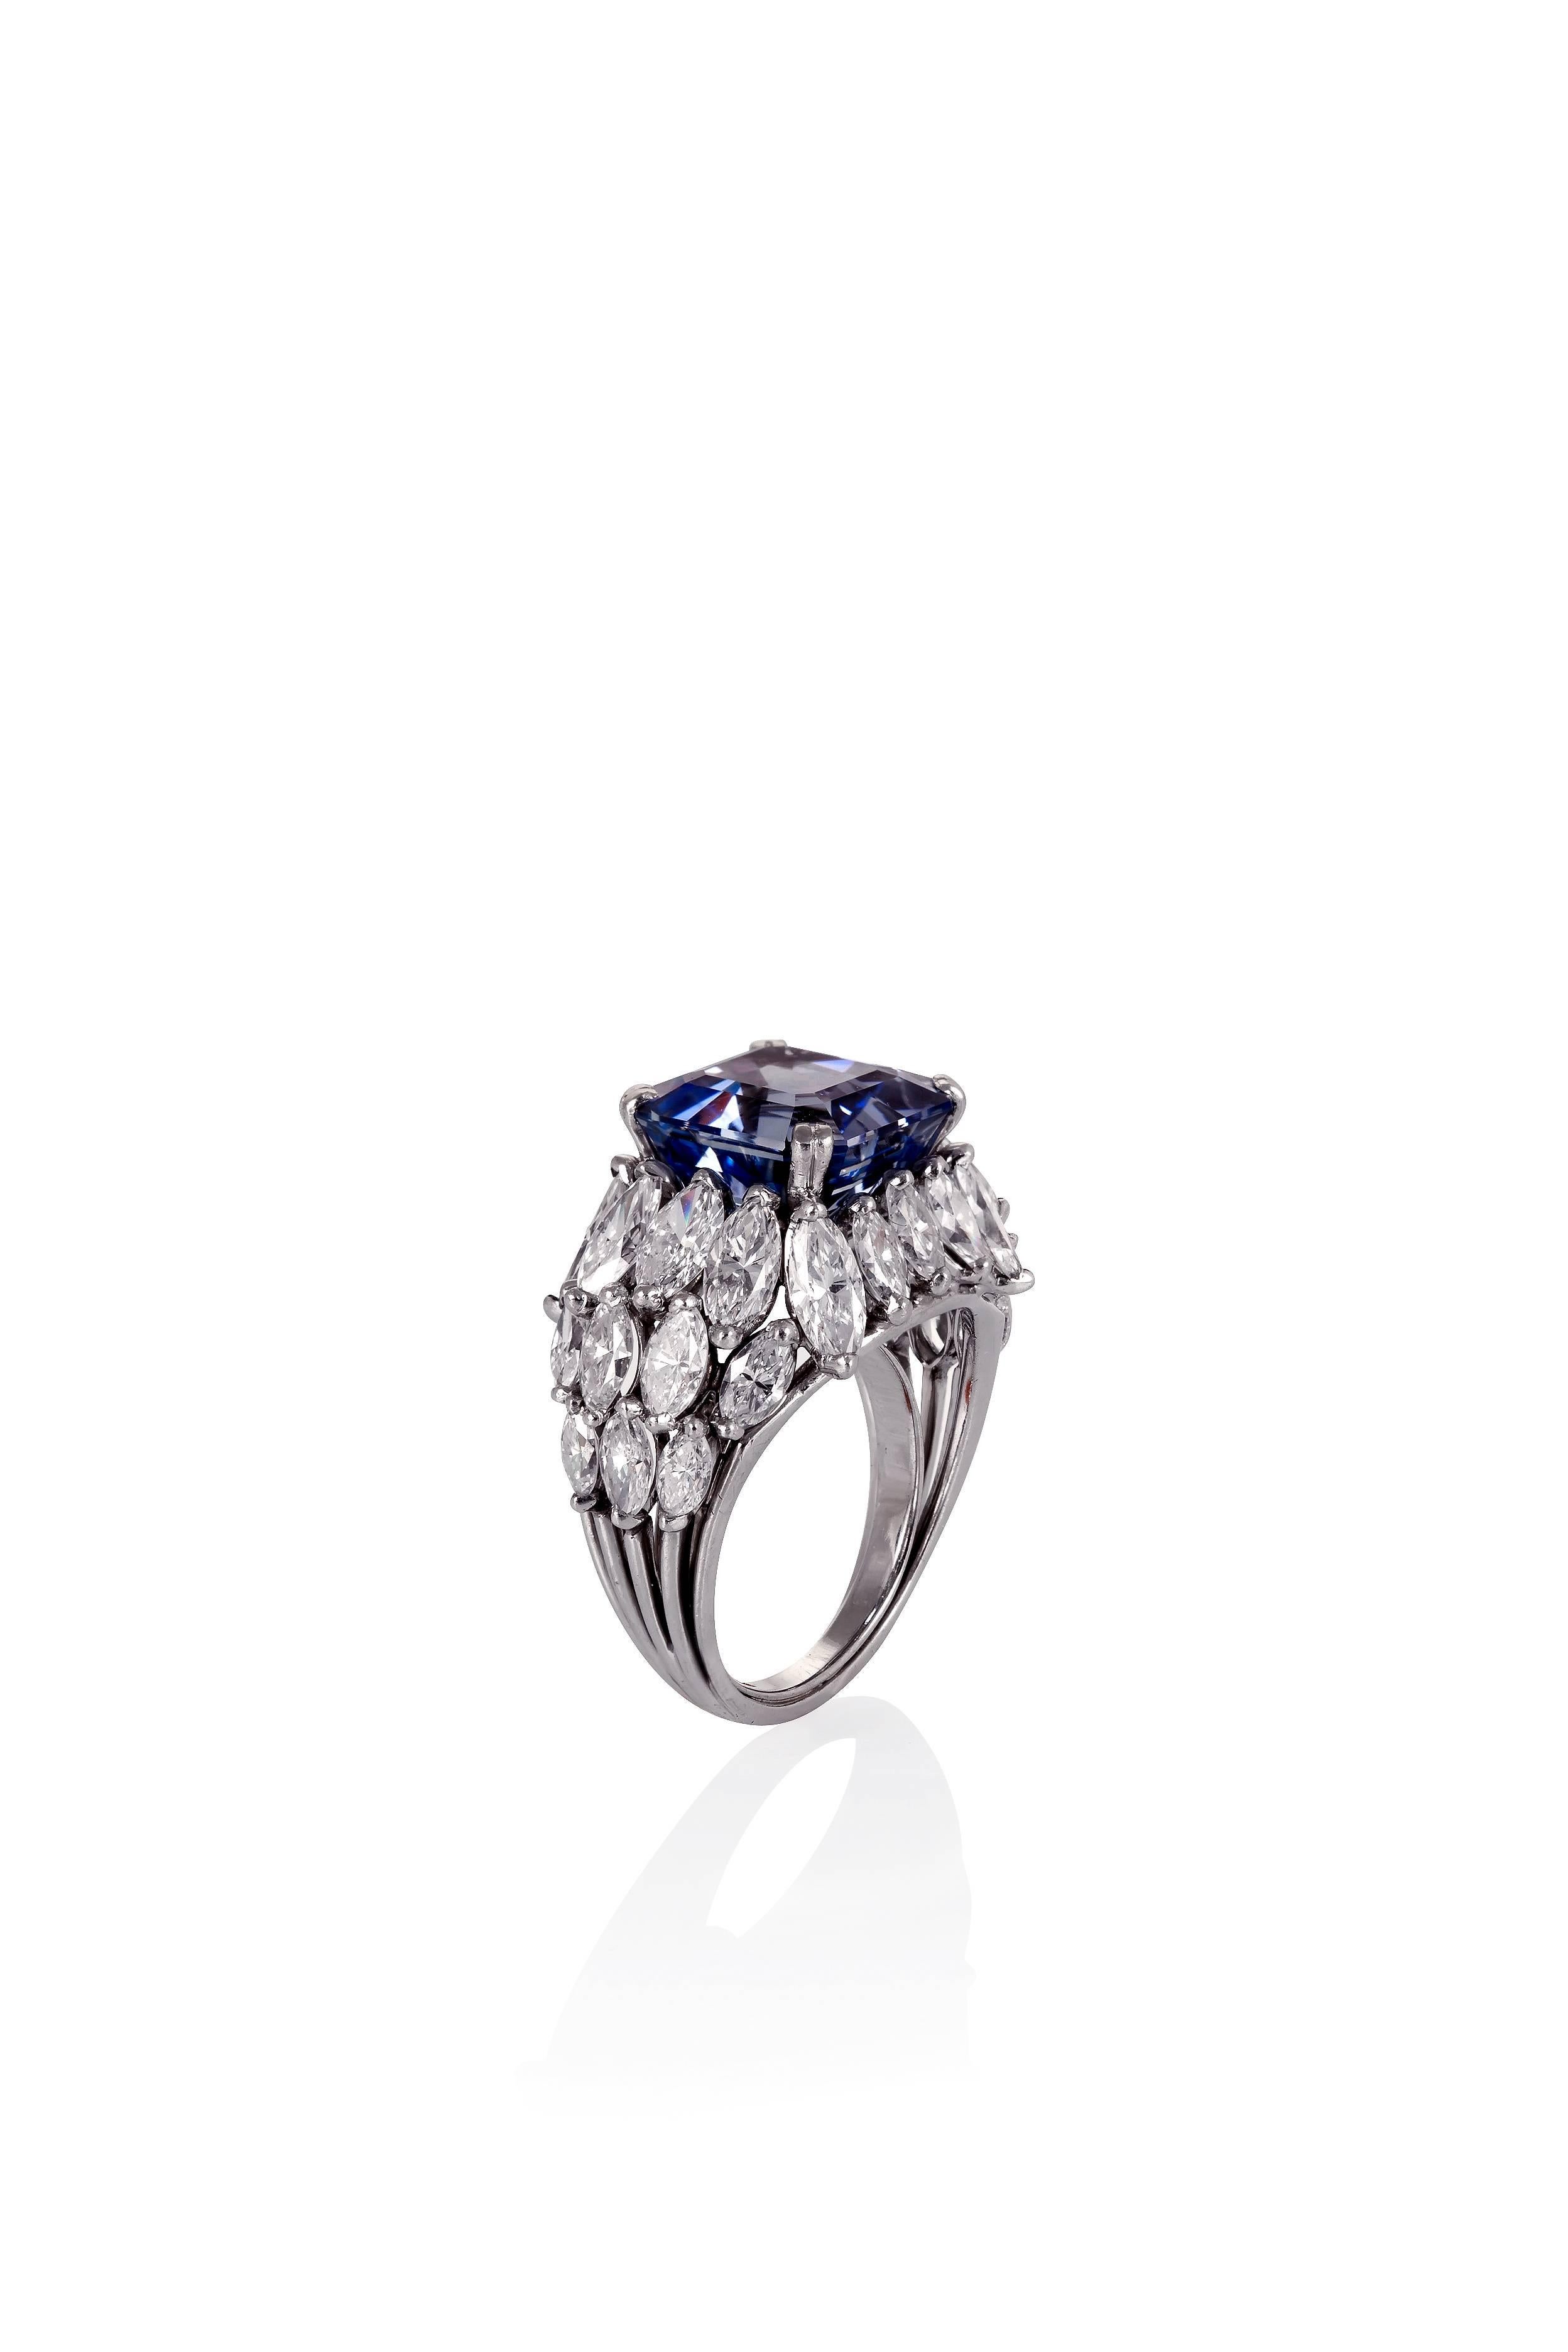 8.02 Carat Sapphire Diamond Platinum Ring In Excellent Condition For Sale In New York, NY